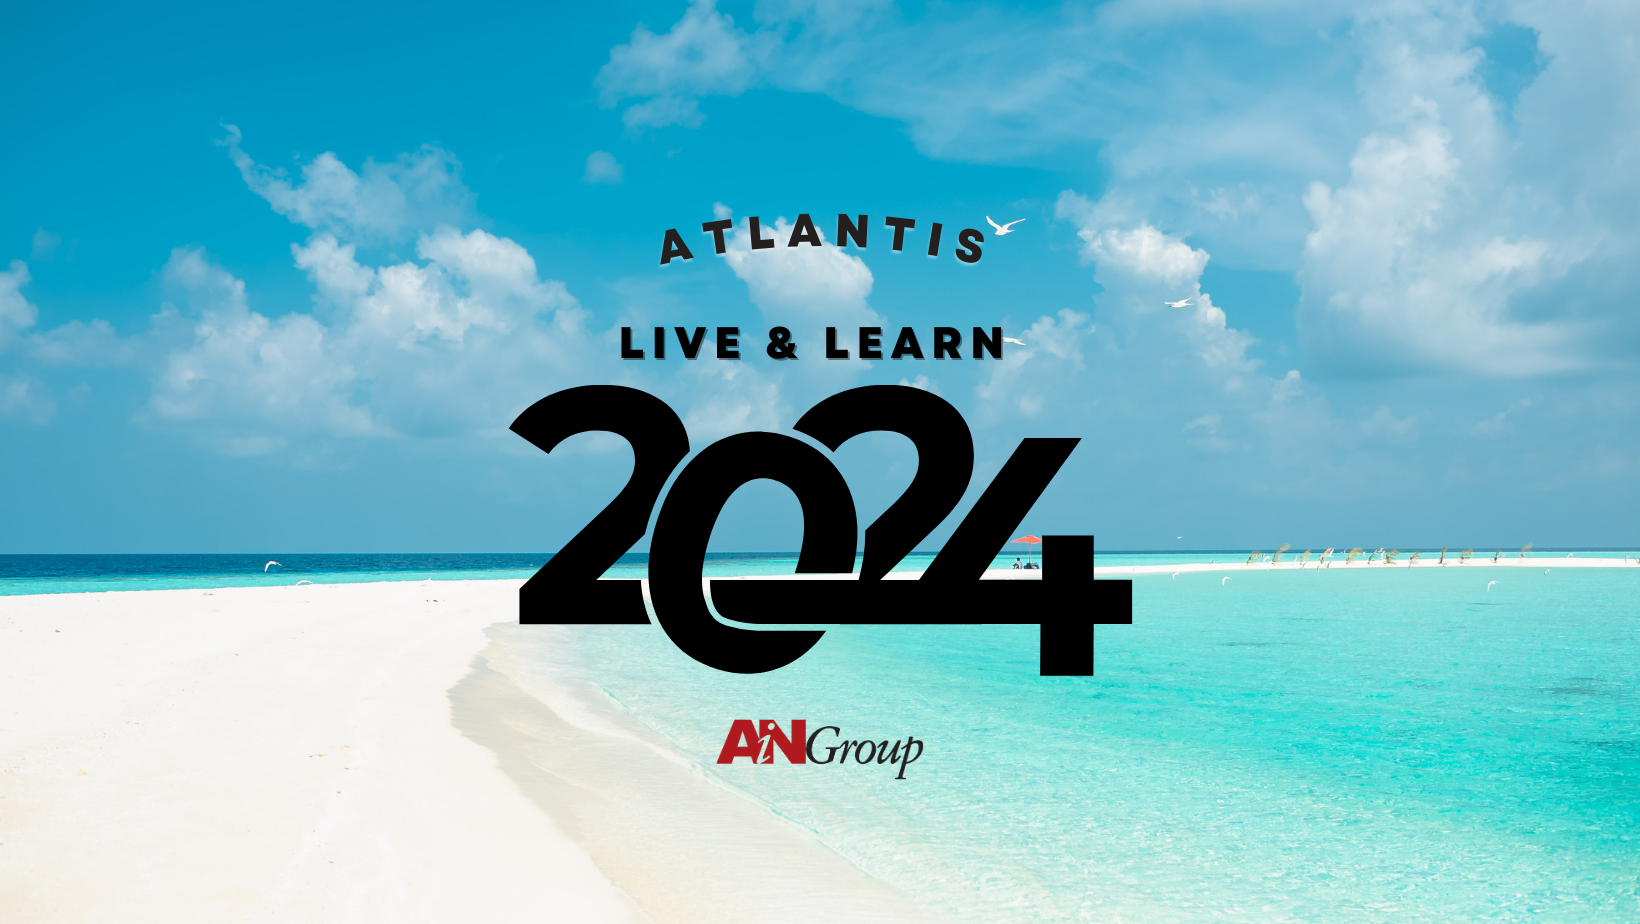 AiN Group Announces 2024 Live & Learn Conference in Atlantis Paradise